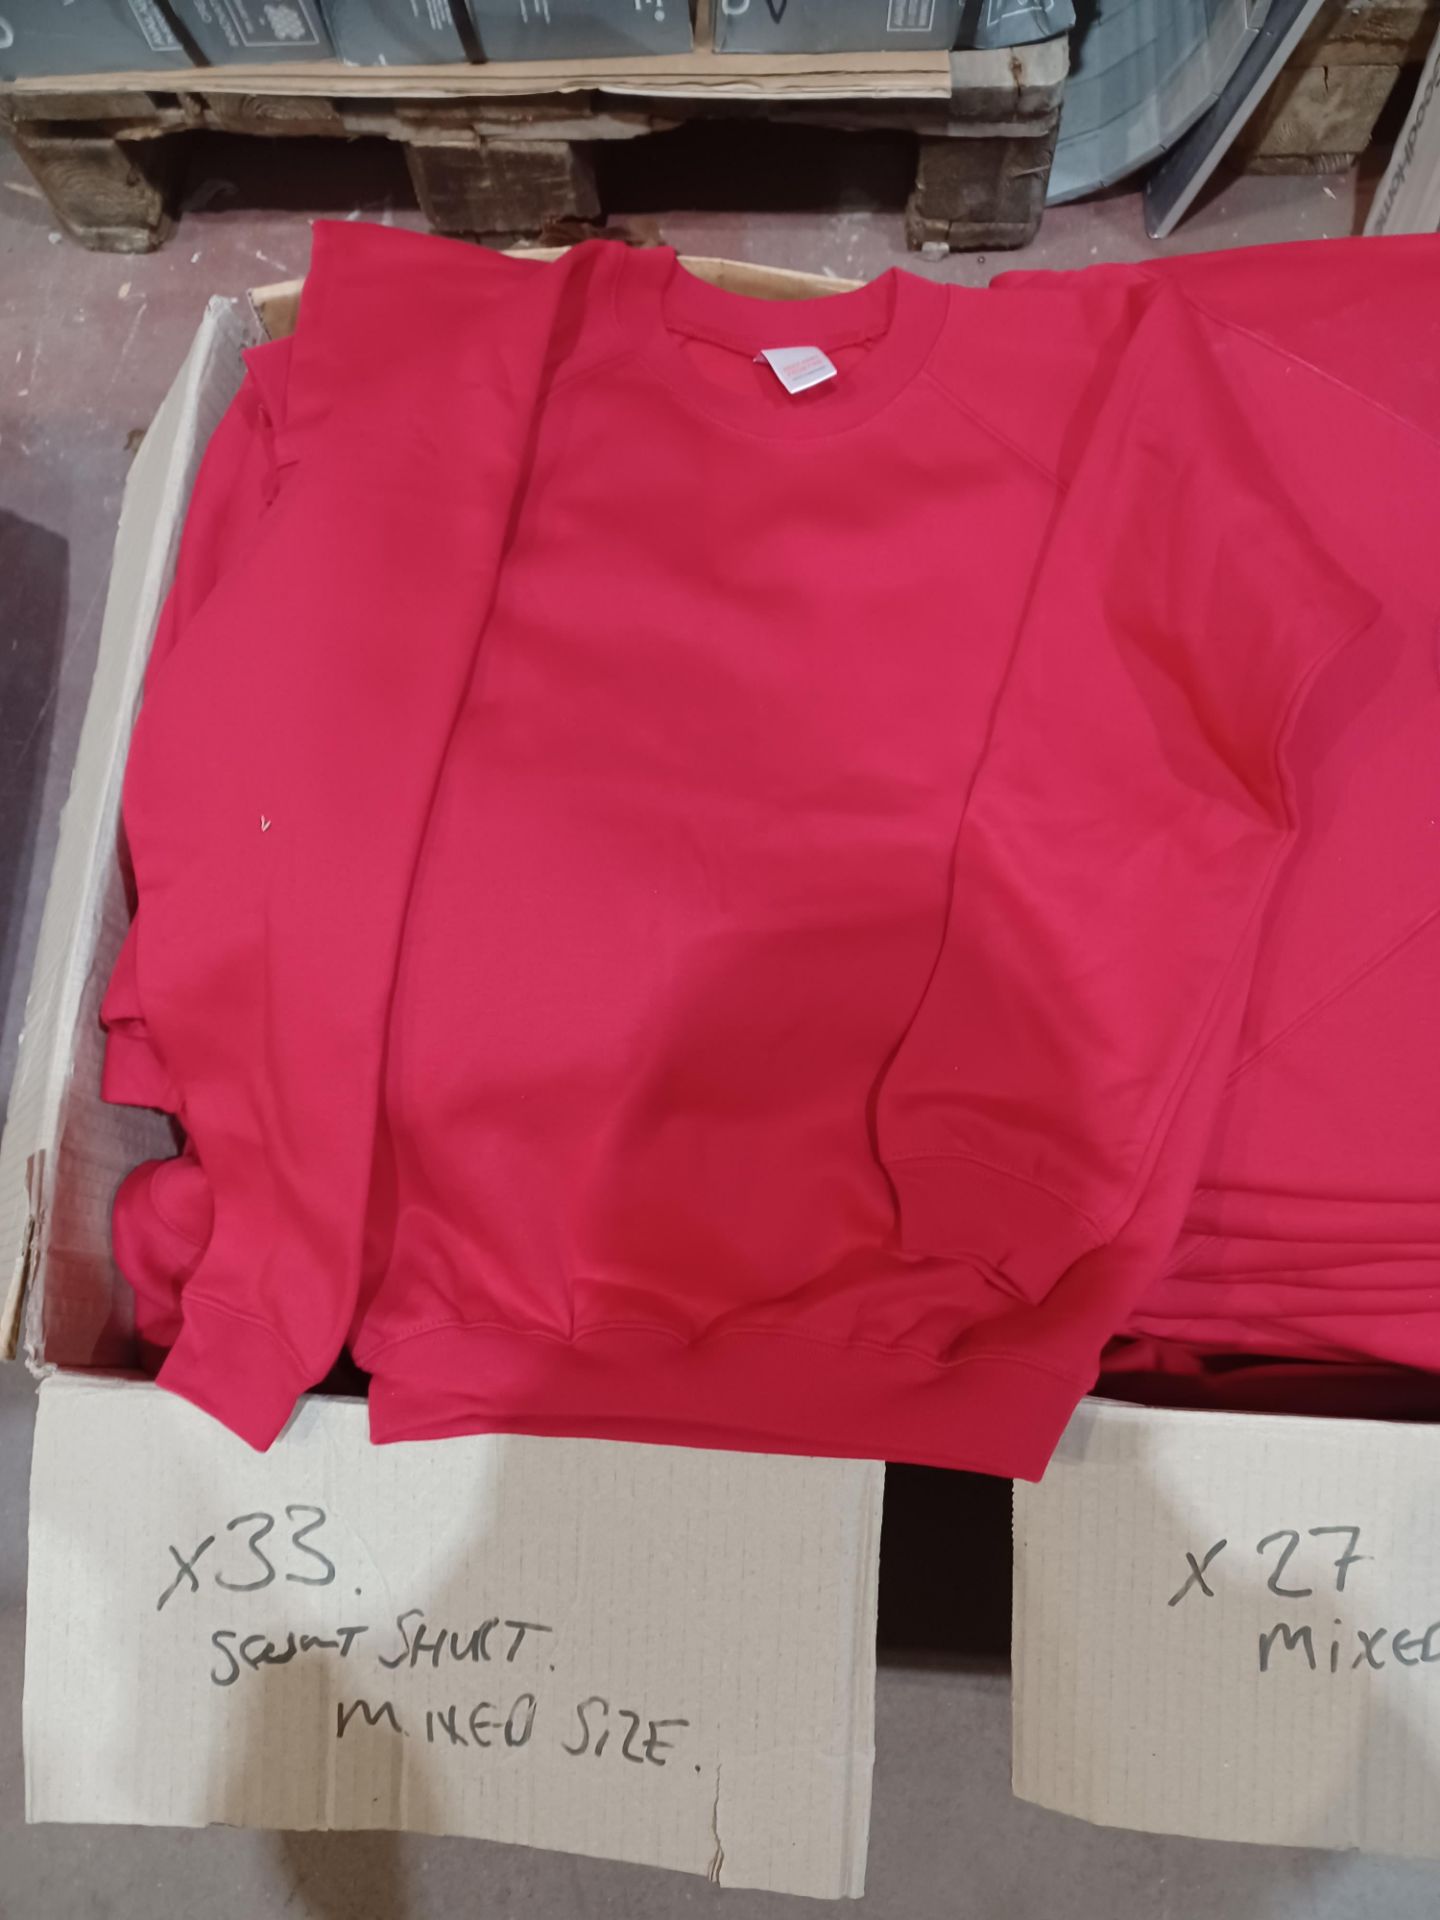 27 x Soft Cotton Fleeced Premium Swearshirts in Red in mixed sizes . RRP £19.81 each - R14